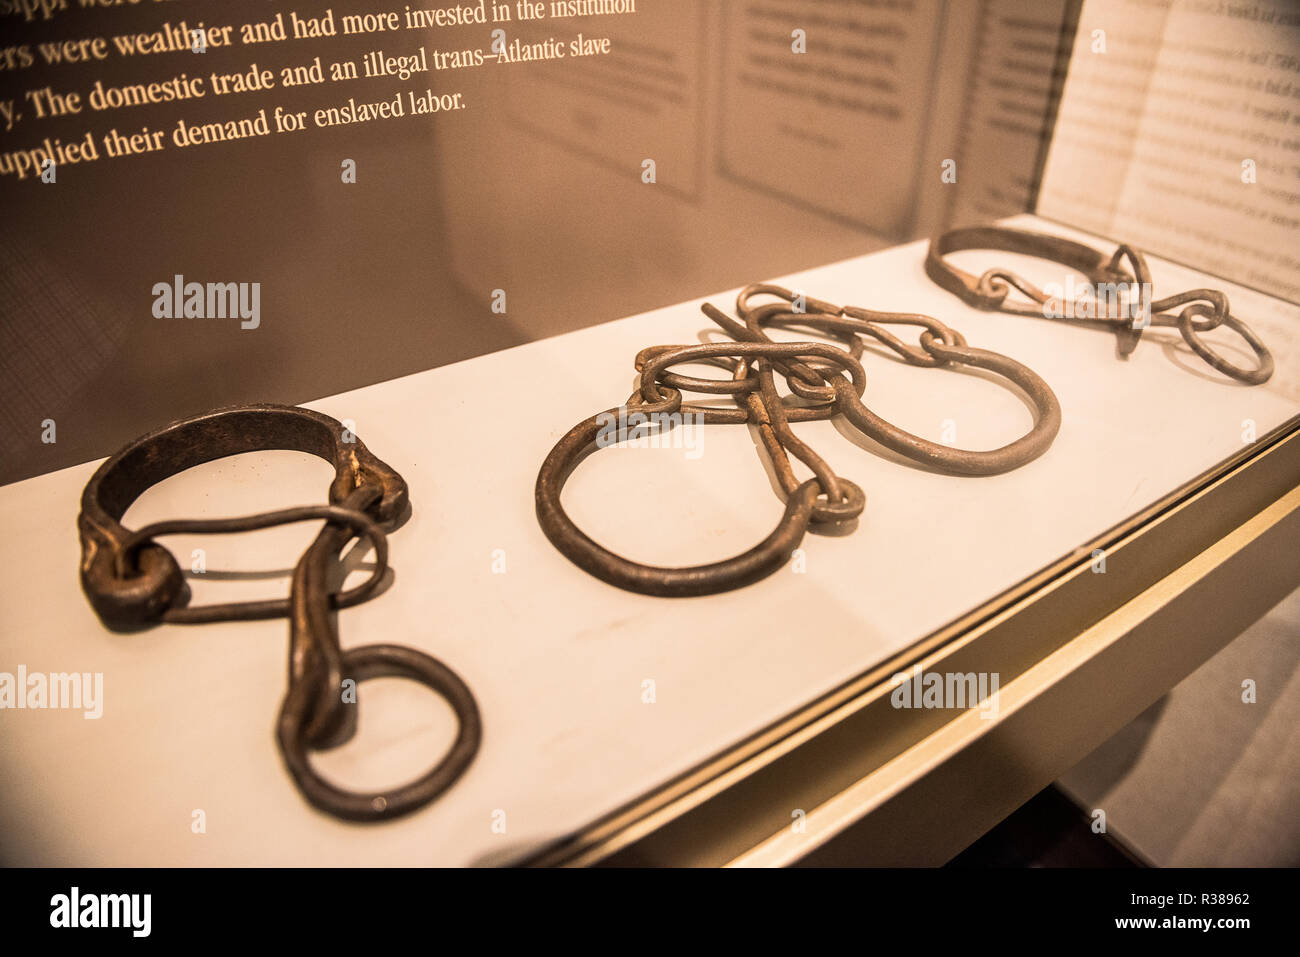 WASHINGTON, DC - Shackles in a display case at the African American Civil War Museum in Washington DC. The African American Civil War Museum preserves and tells the stories of the united States Colored Troops in the American Civil War. The museum is located in Northwest Washington DC, across the street from the African American Civil War Memorial, in the U Street neighborhood. Stock Photo